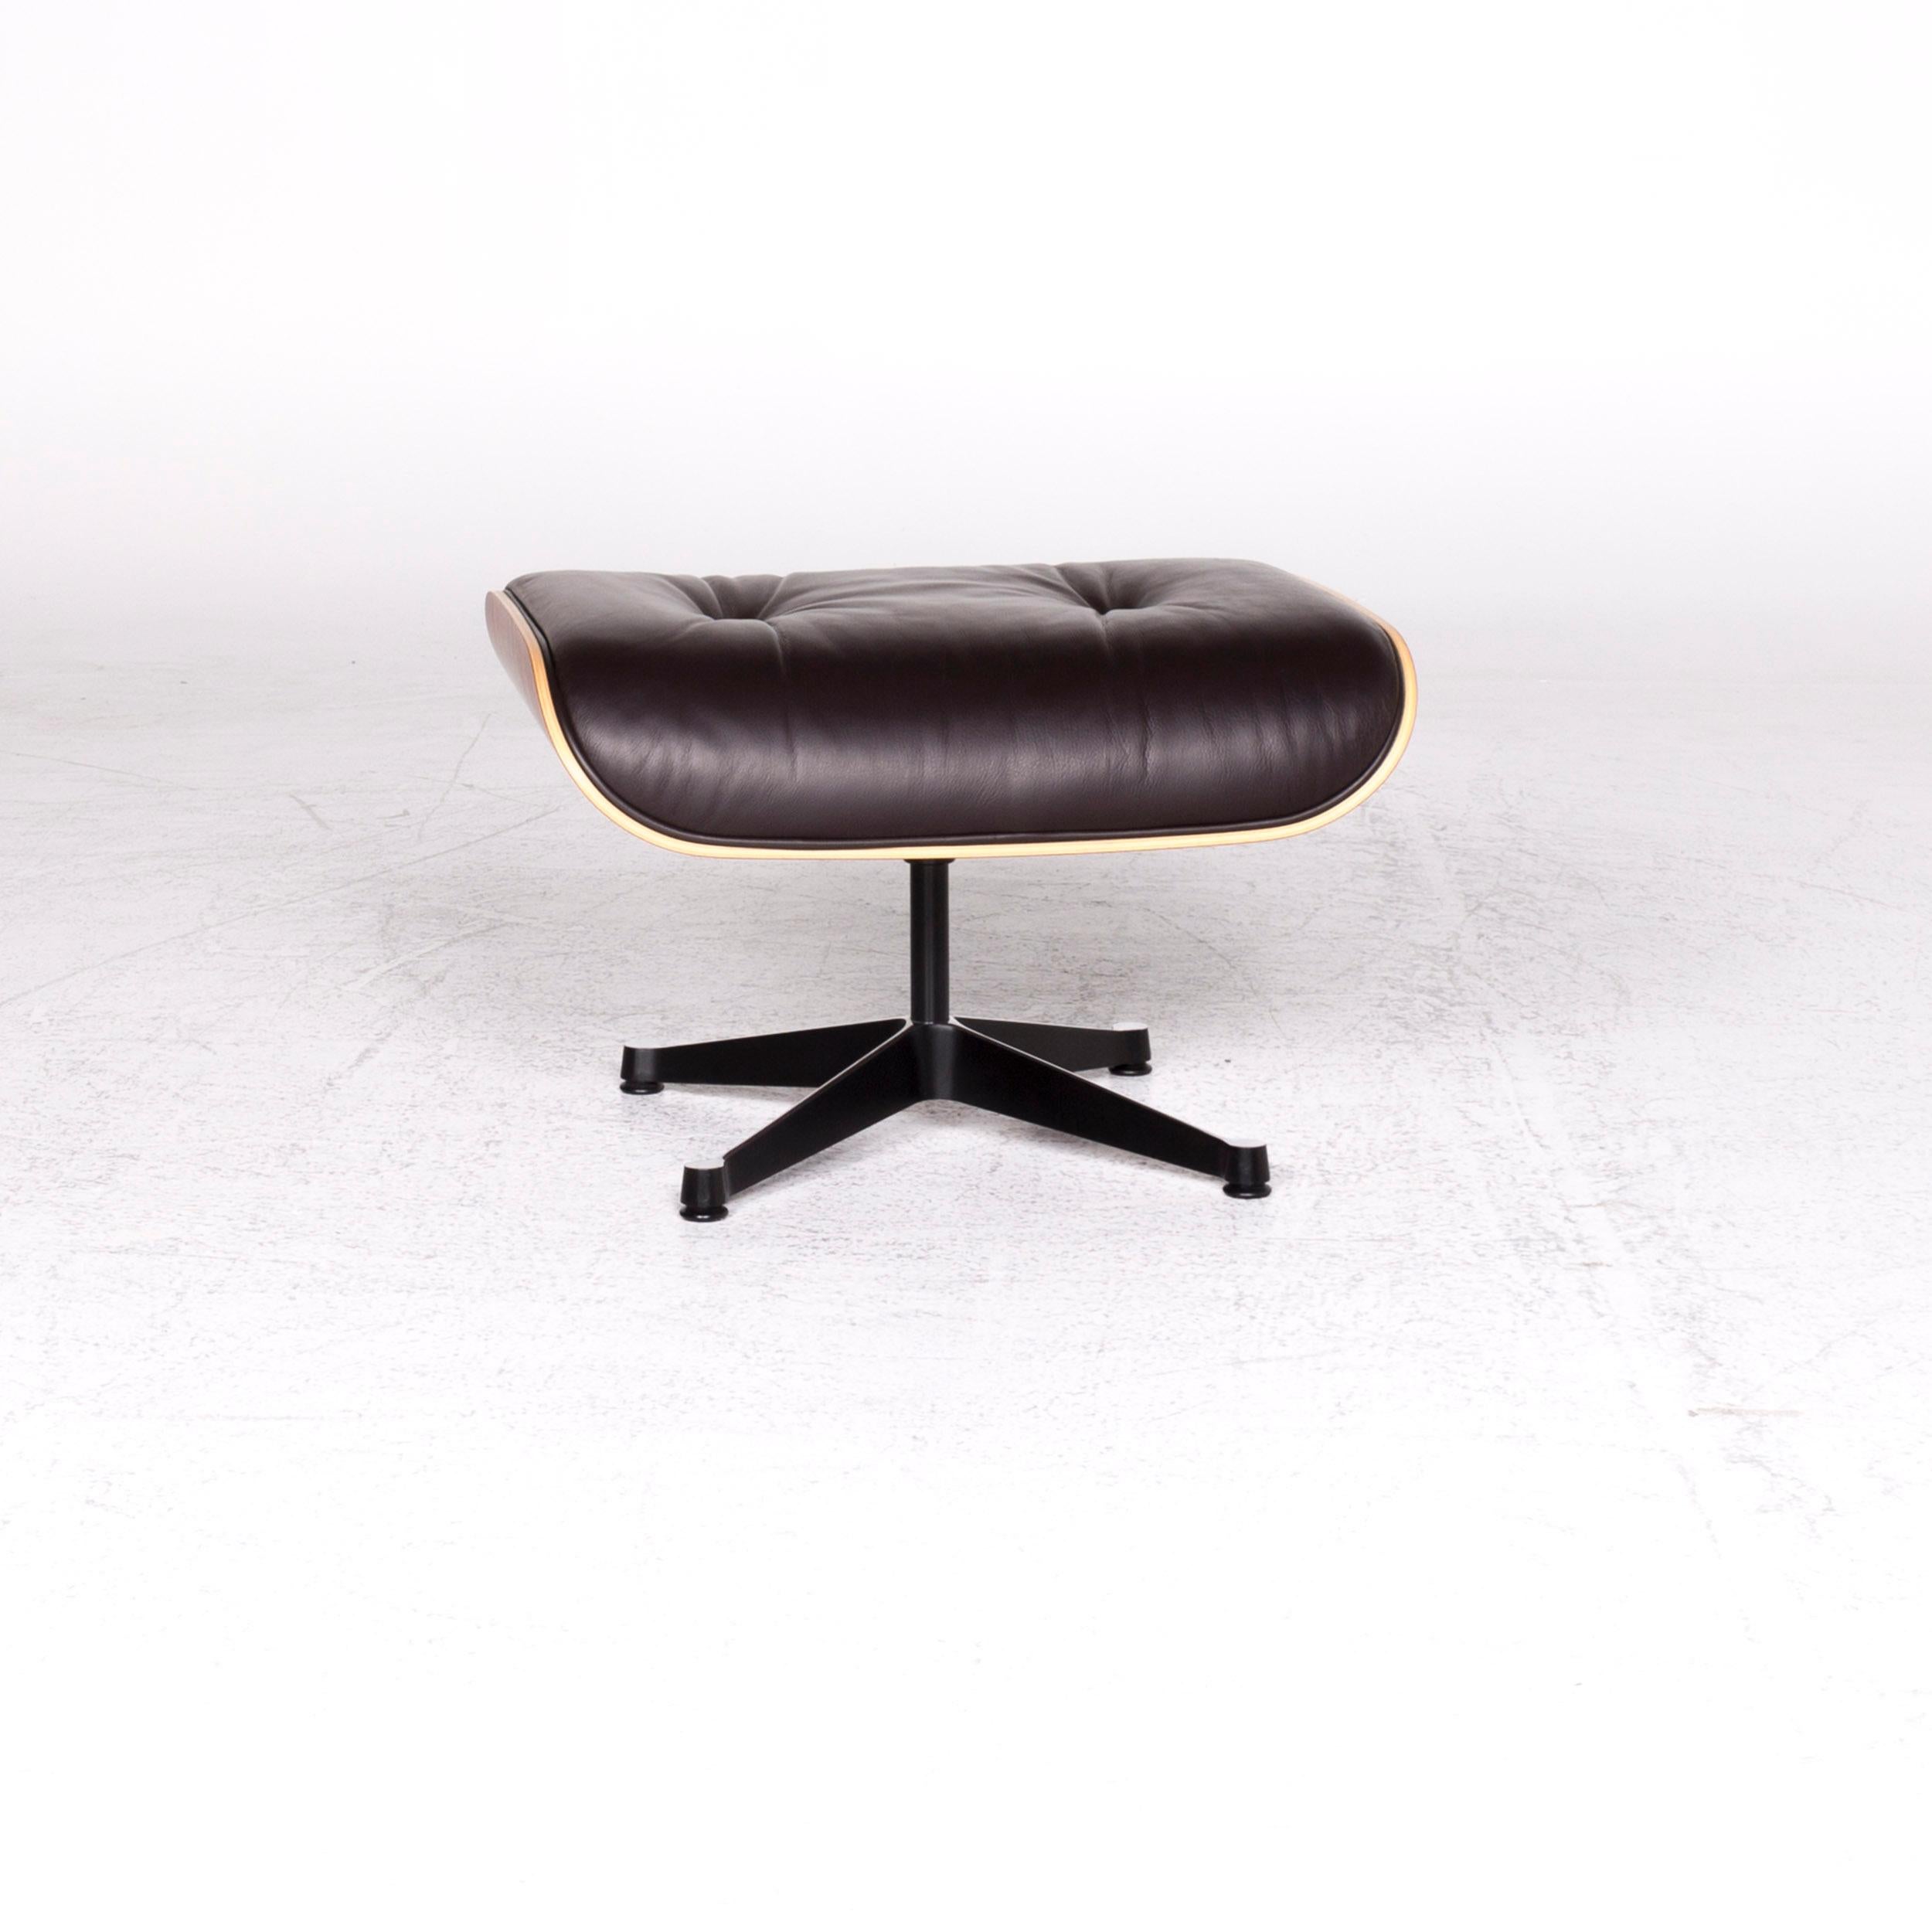 Vitra Eames Lounge Chair Leather Stool Set Brown Charles & Ray Eames Chair In Good Condition For Sale In Cologne, DE